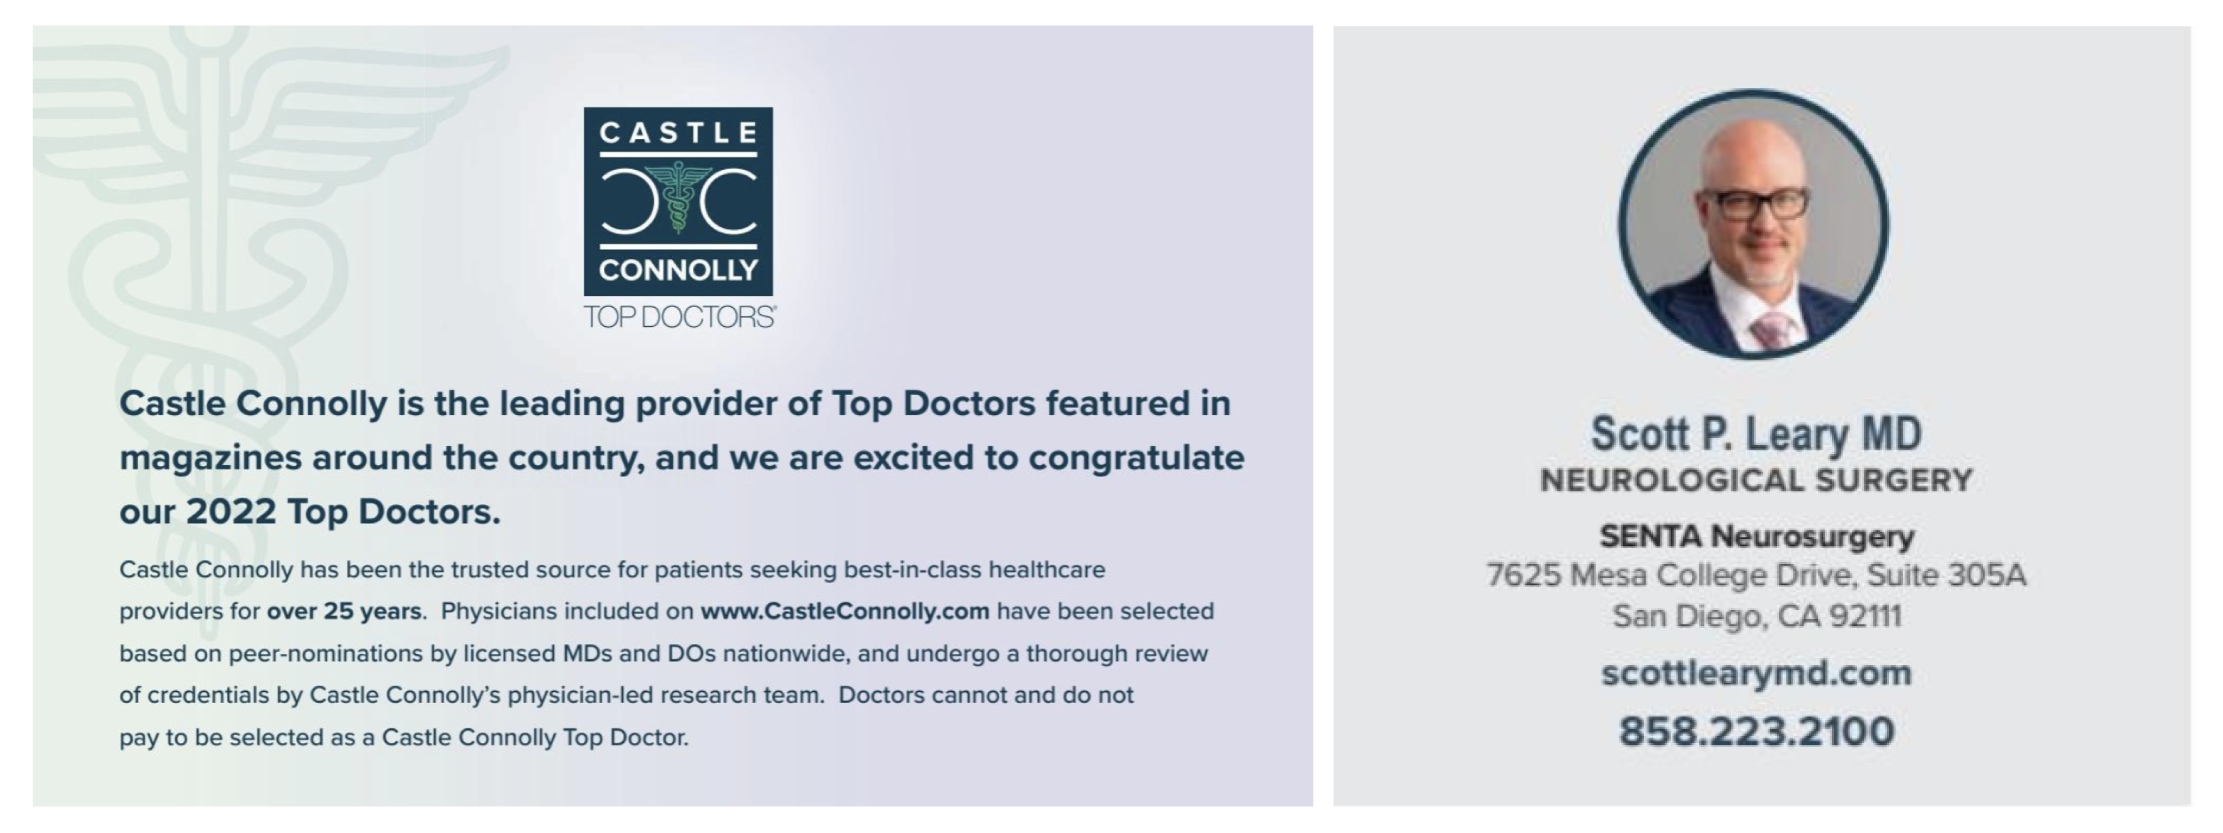 Scott P Leary featured in Castle Connolly Top Doctors